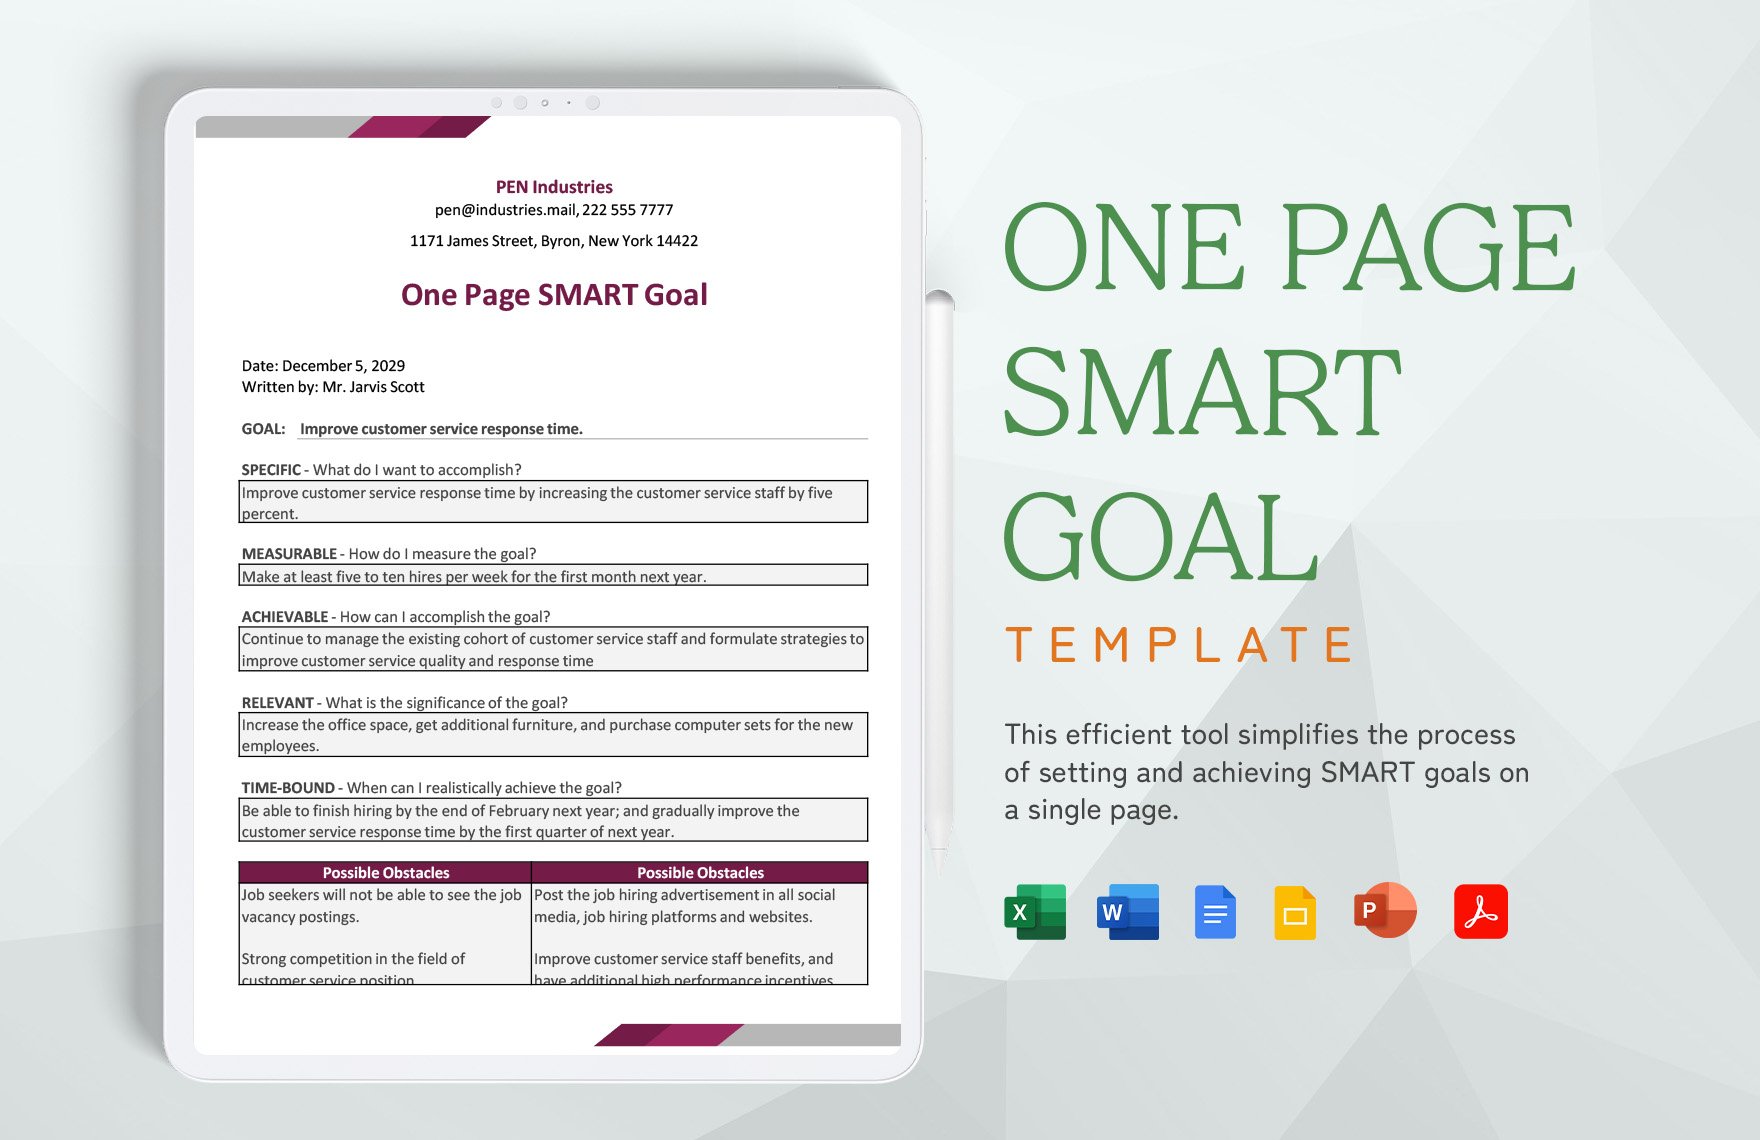 One Page Smart Goal Template